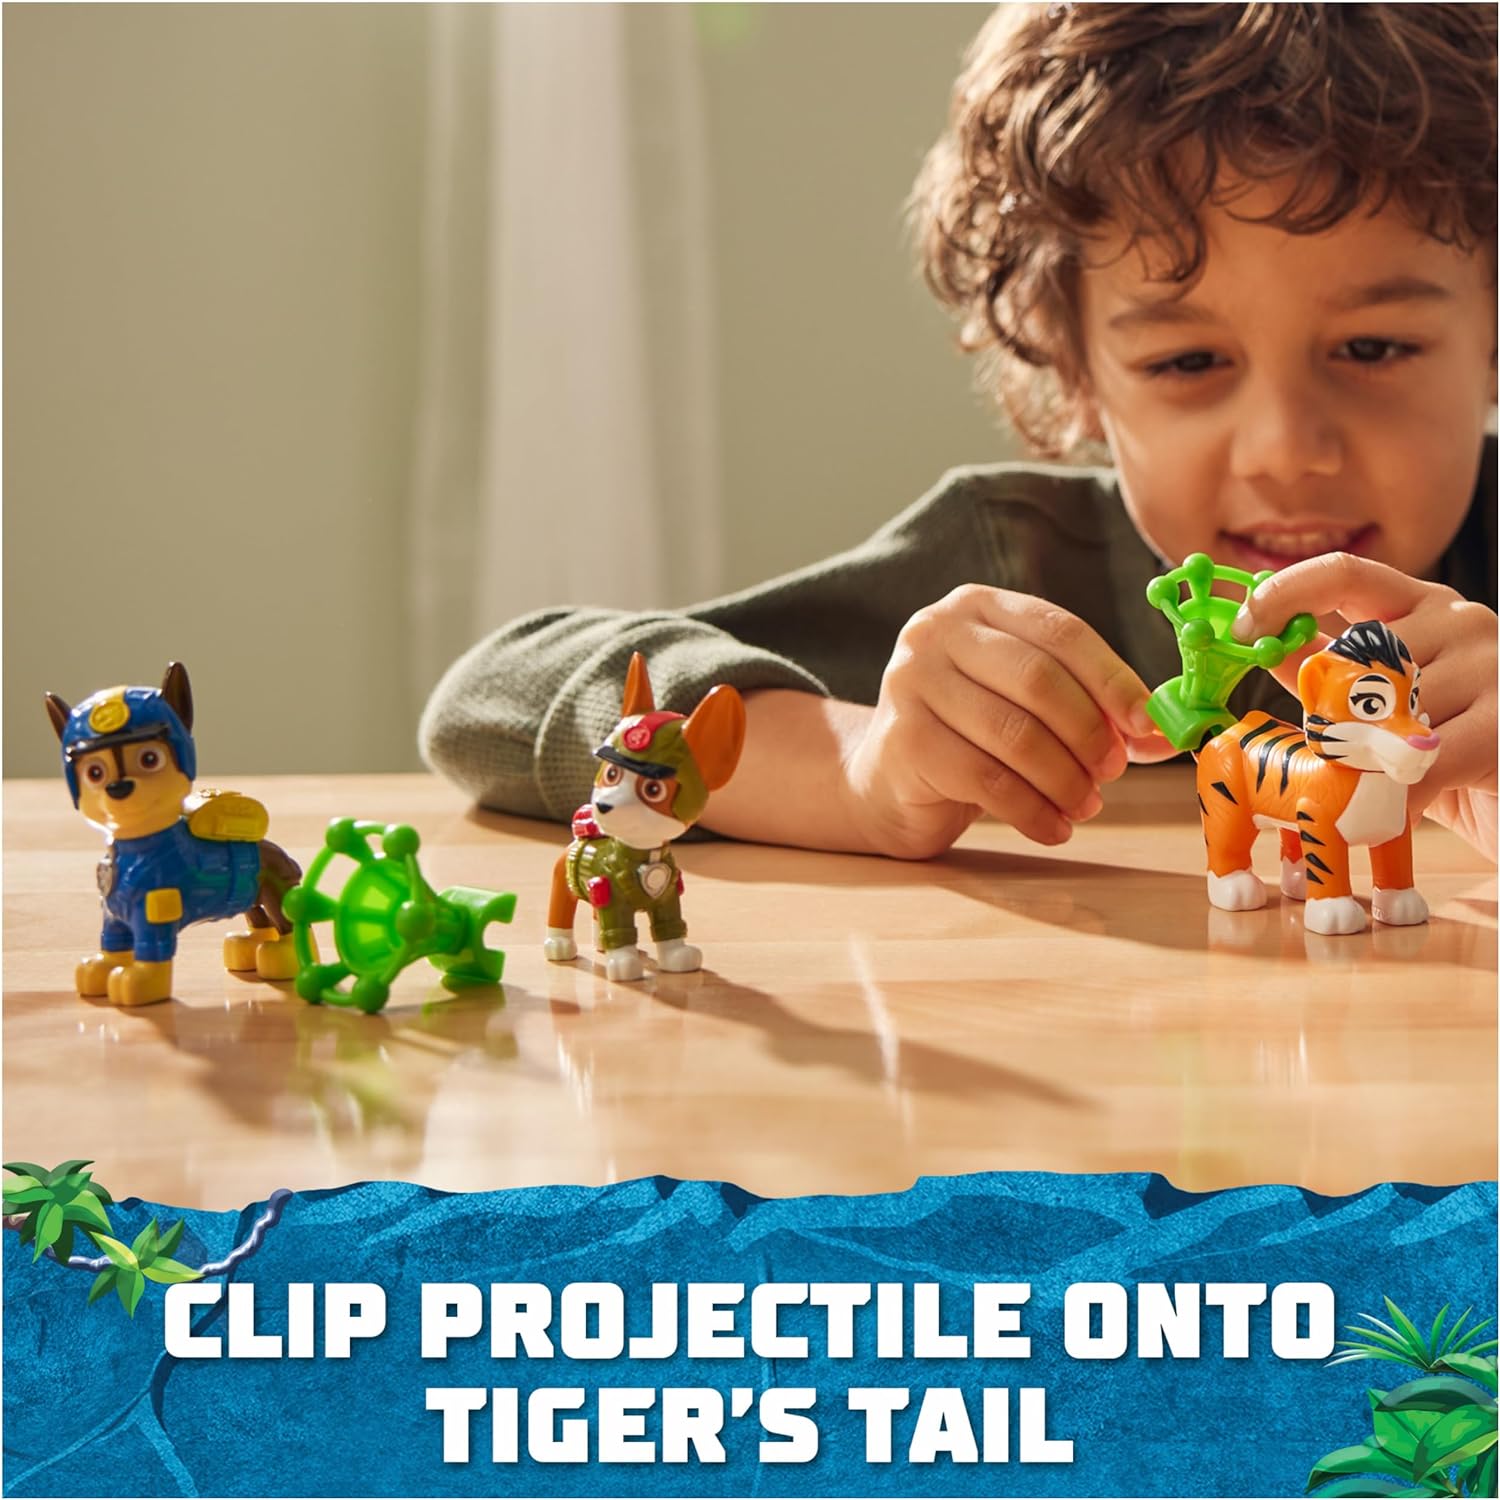 Paw Patrol Jungle Pups Chase, Tracker & Tiger Action Figures